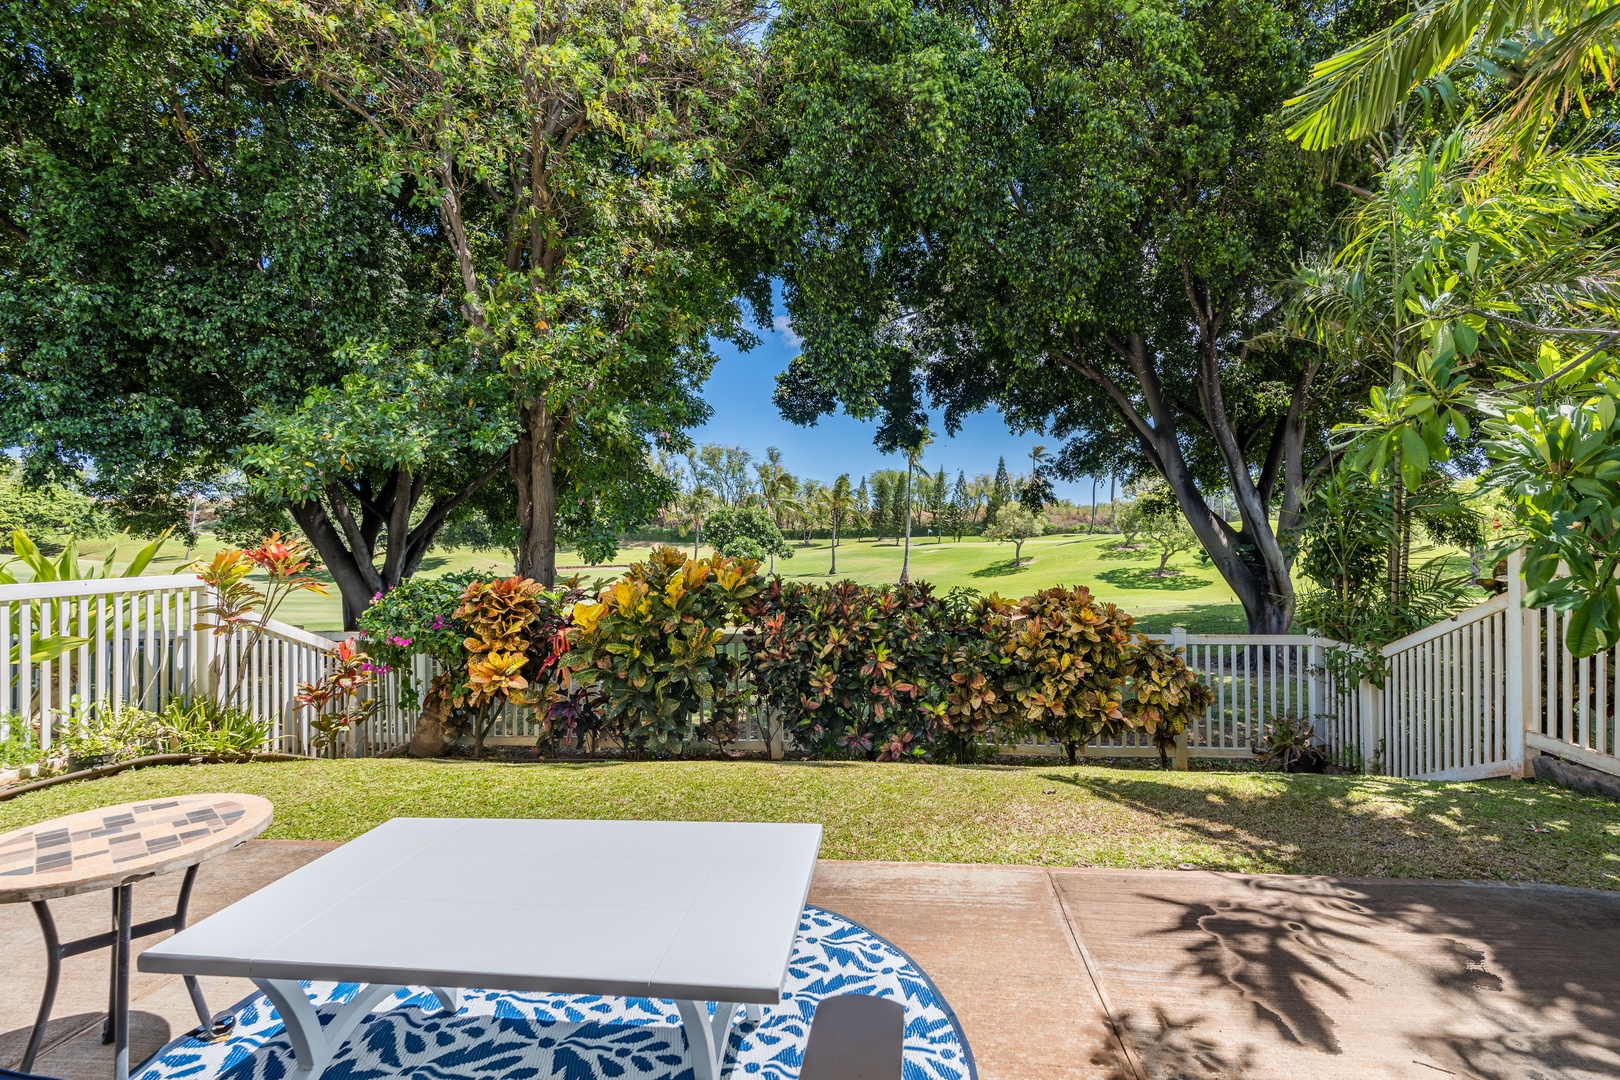 Kapolei Vacation Rentals, Fairways at Ko Olina 18C - Another view of the golf course from the lanai.